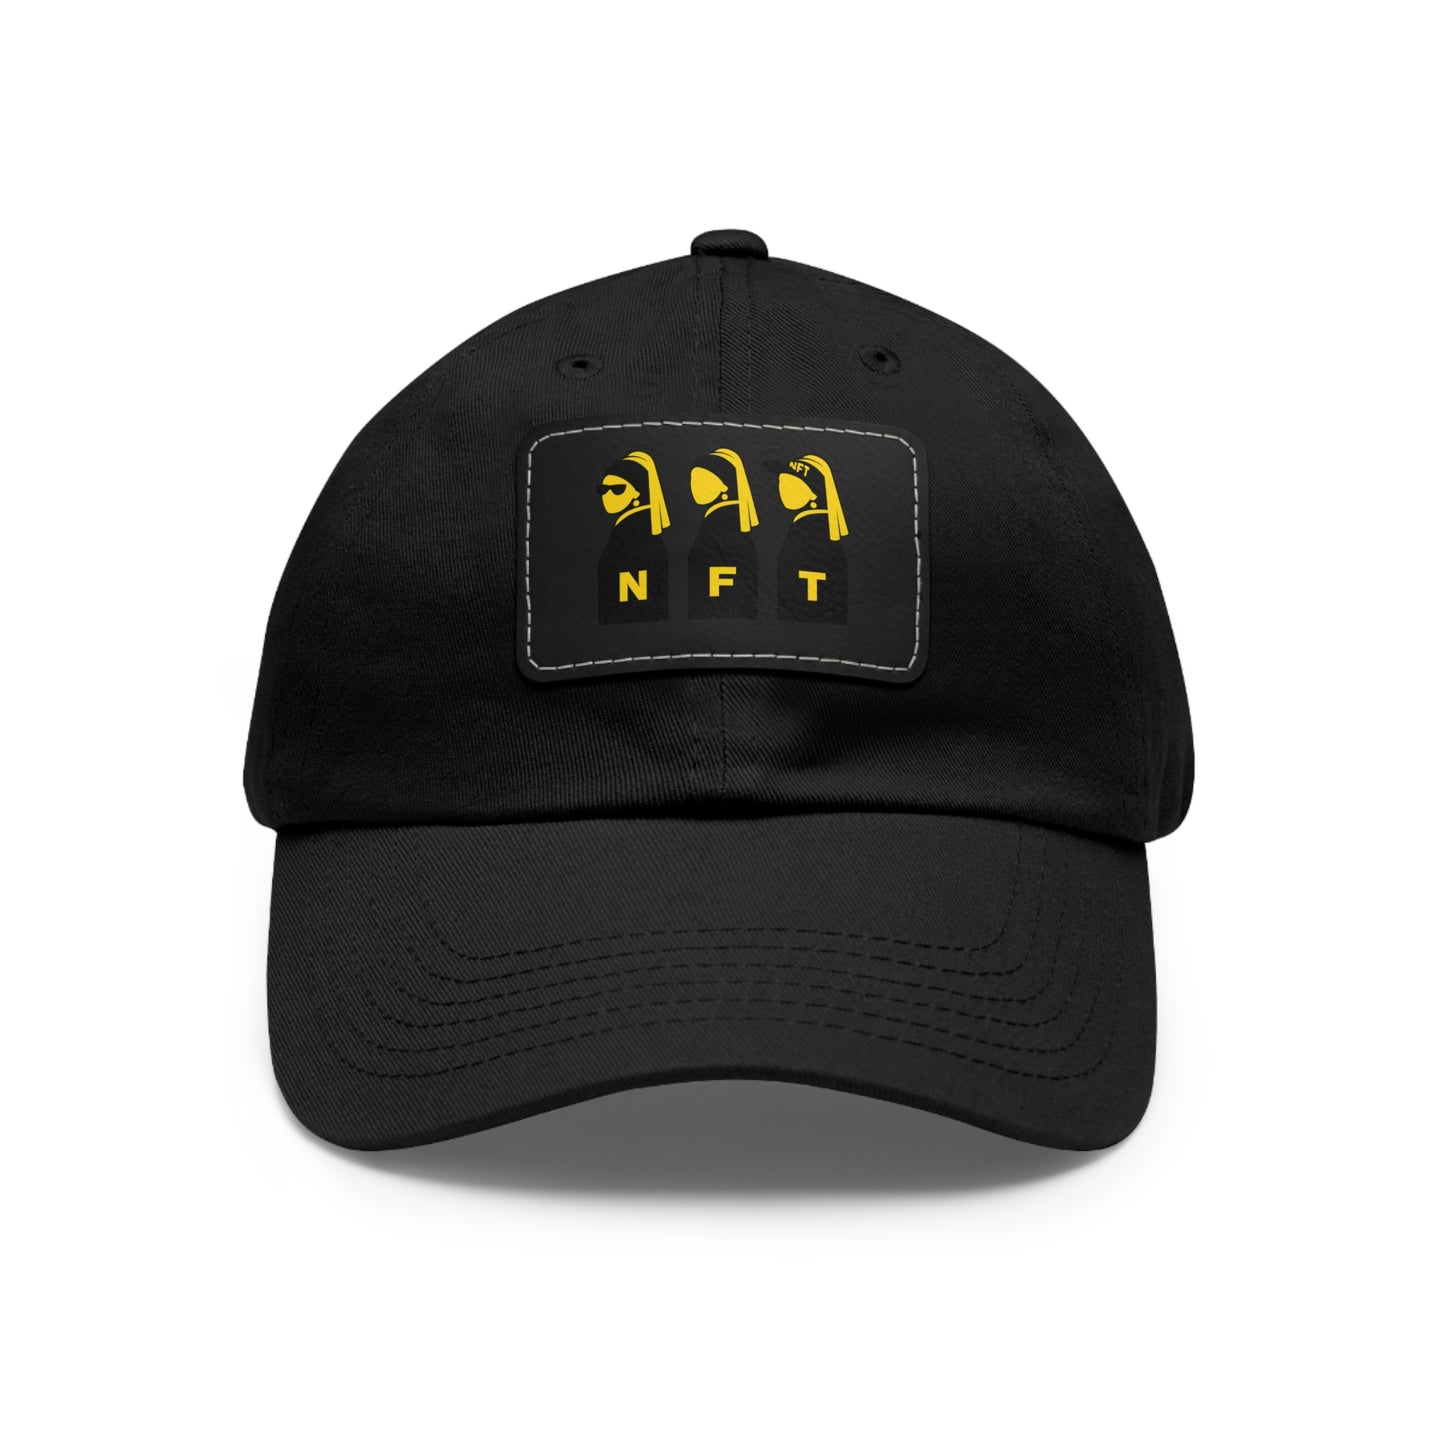 NFT Hat with Leather Patch